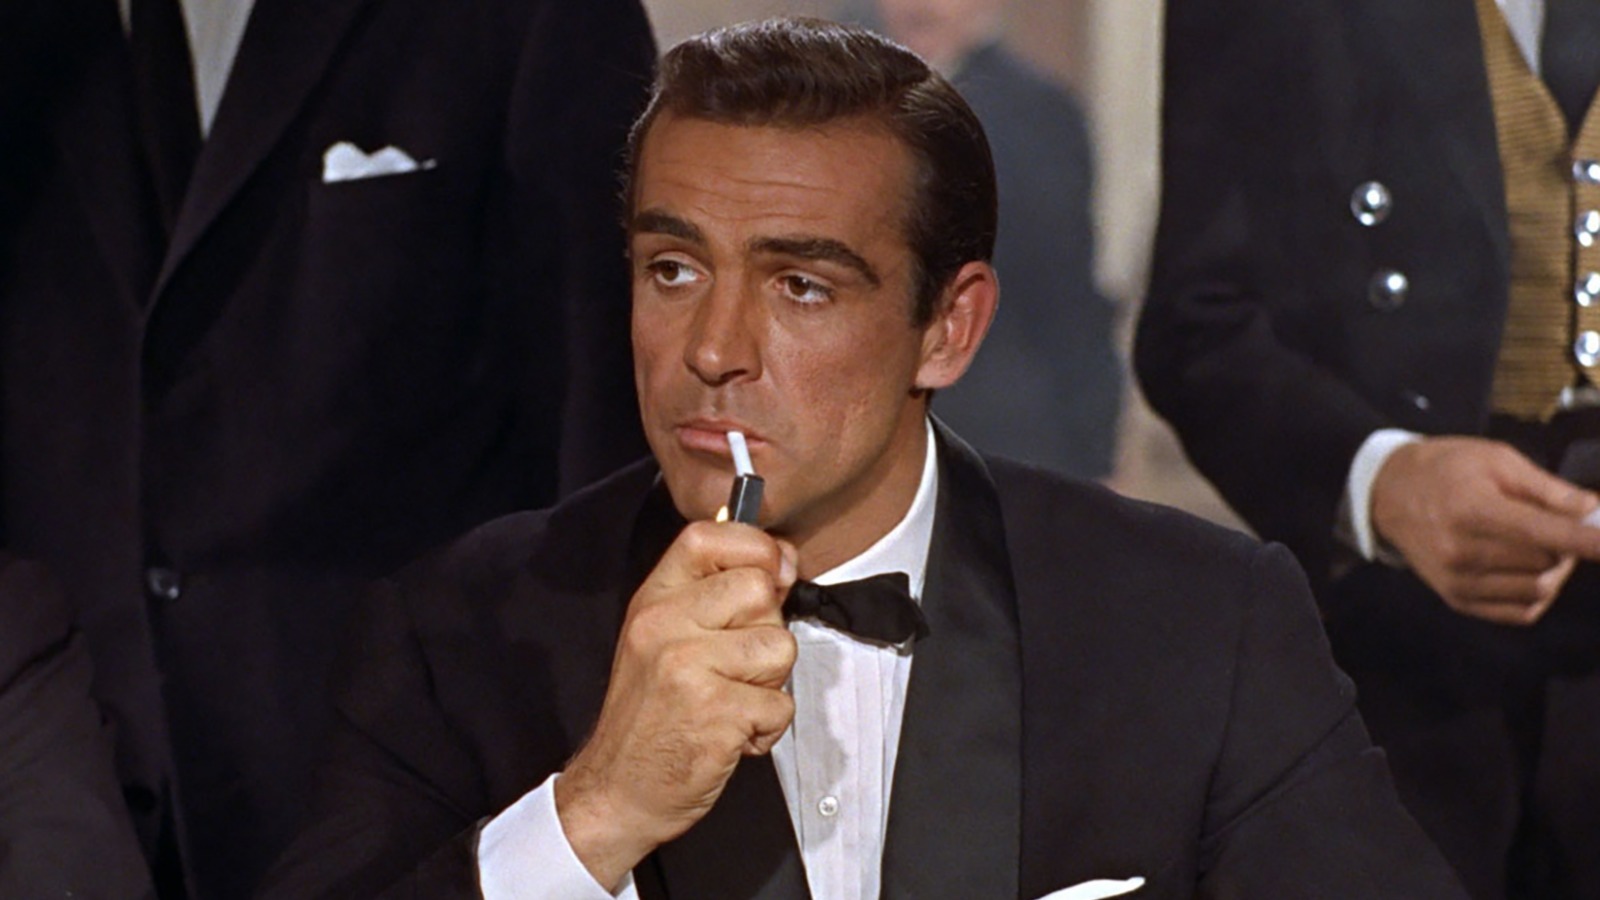 The Real Reason Sean Connery Stopped Playing James Bond